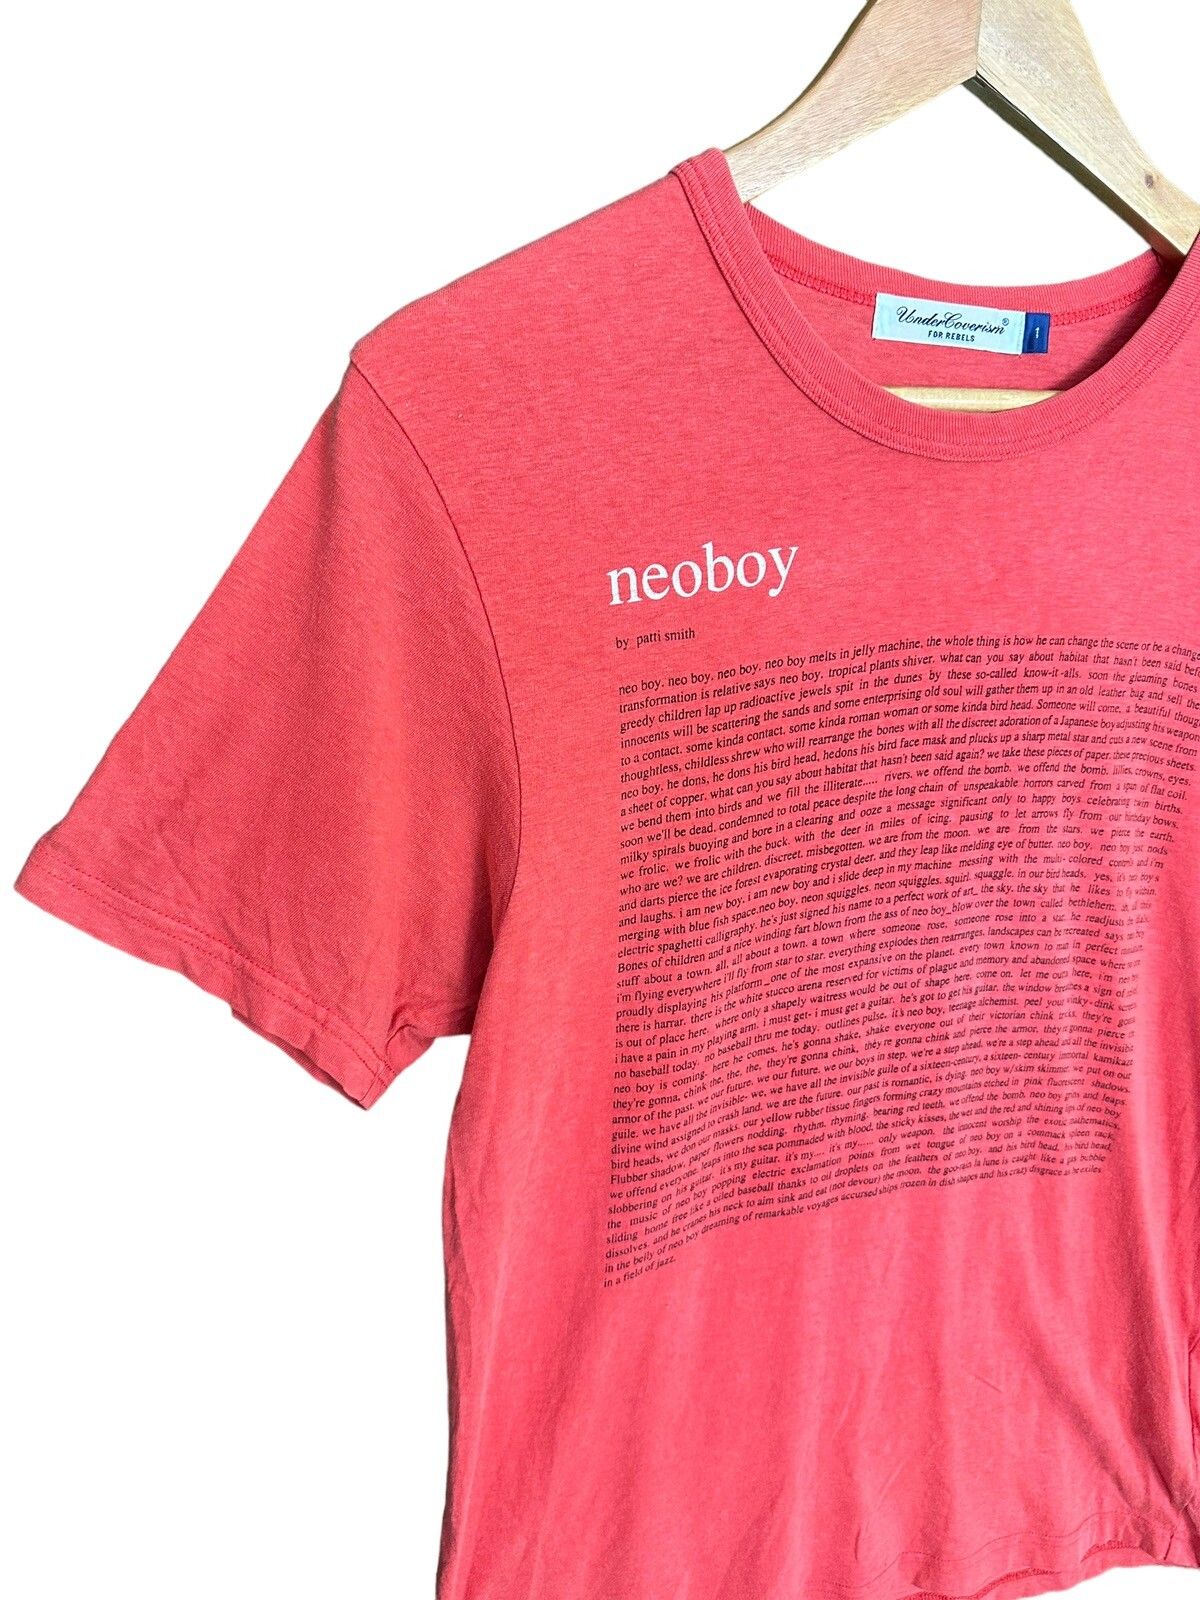 Undercover Rare SS09 Neoboy By Patti Smith T-Shirt | Grailed